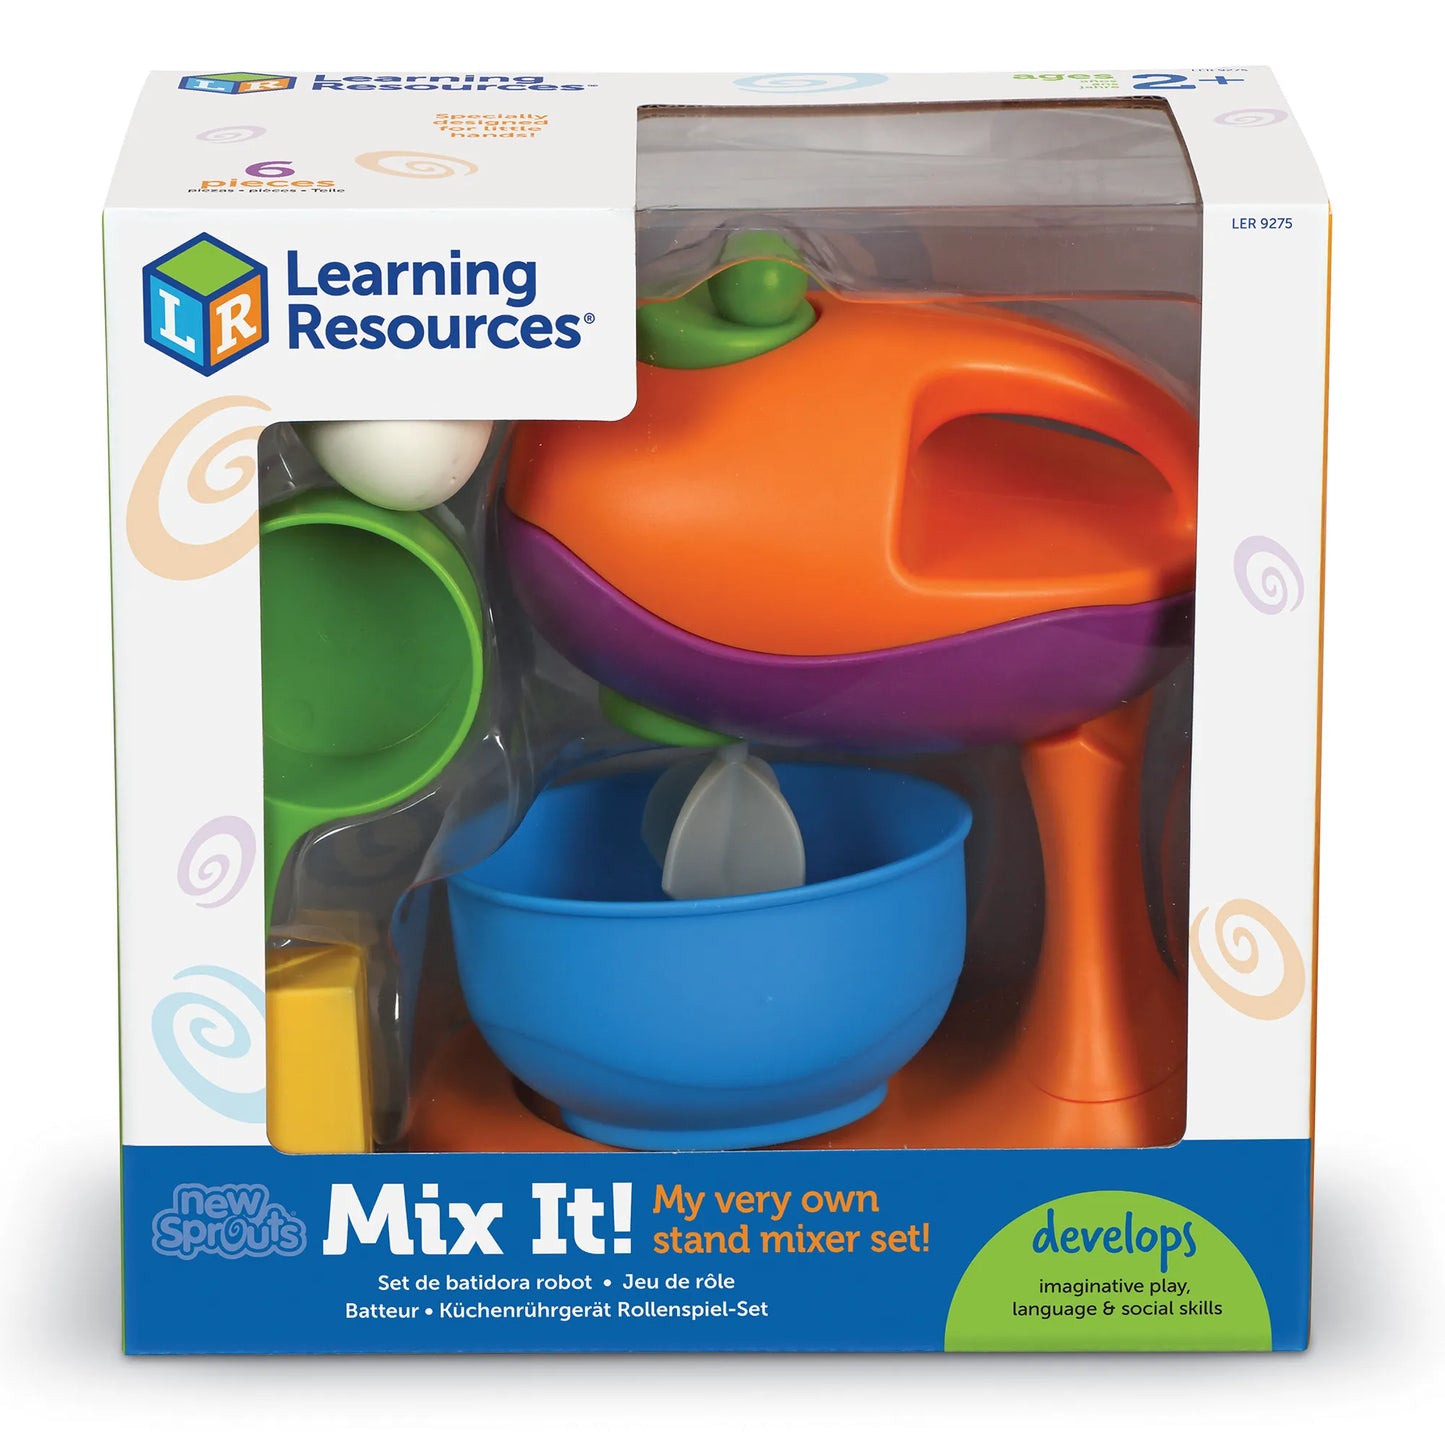 Learning Resources New Sprouts Mix It!